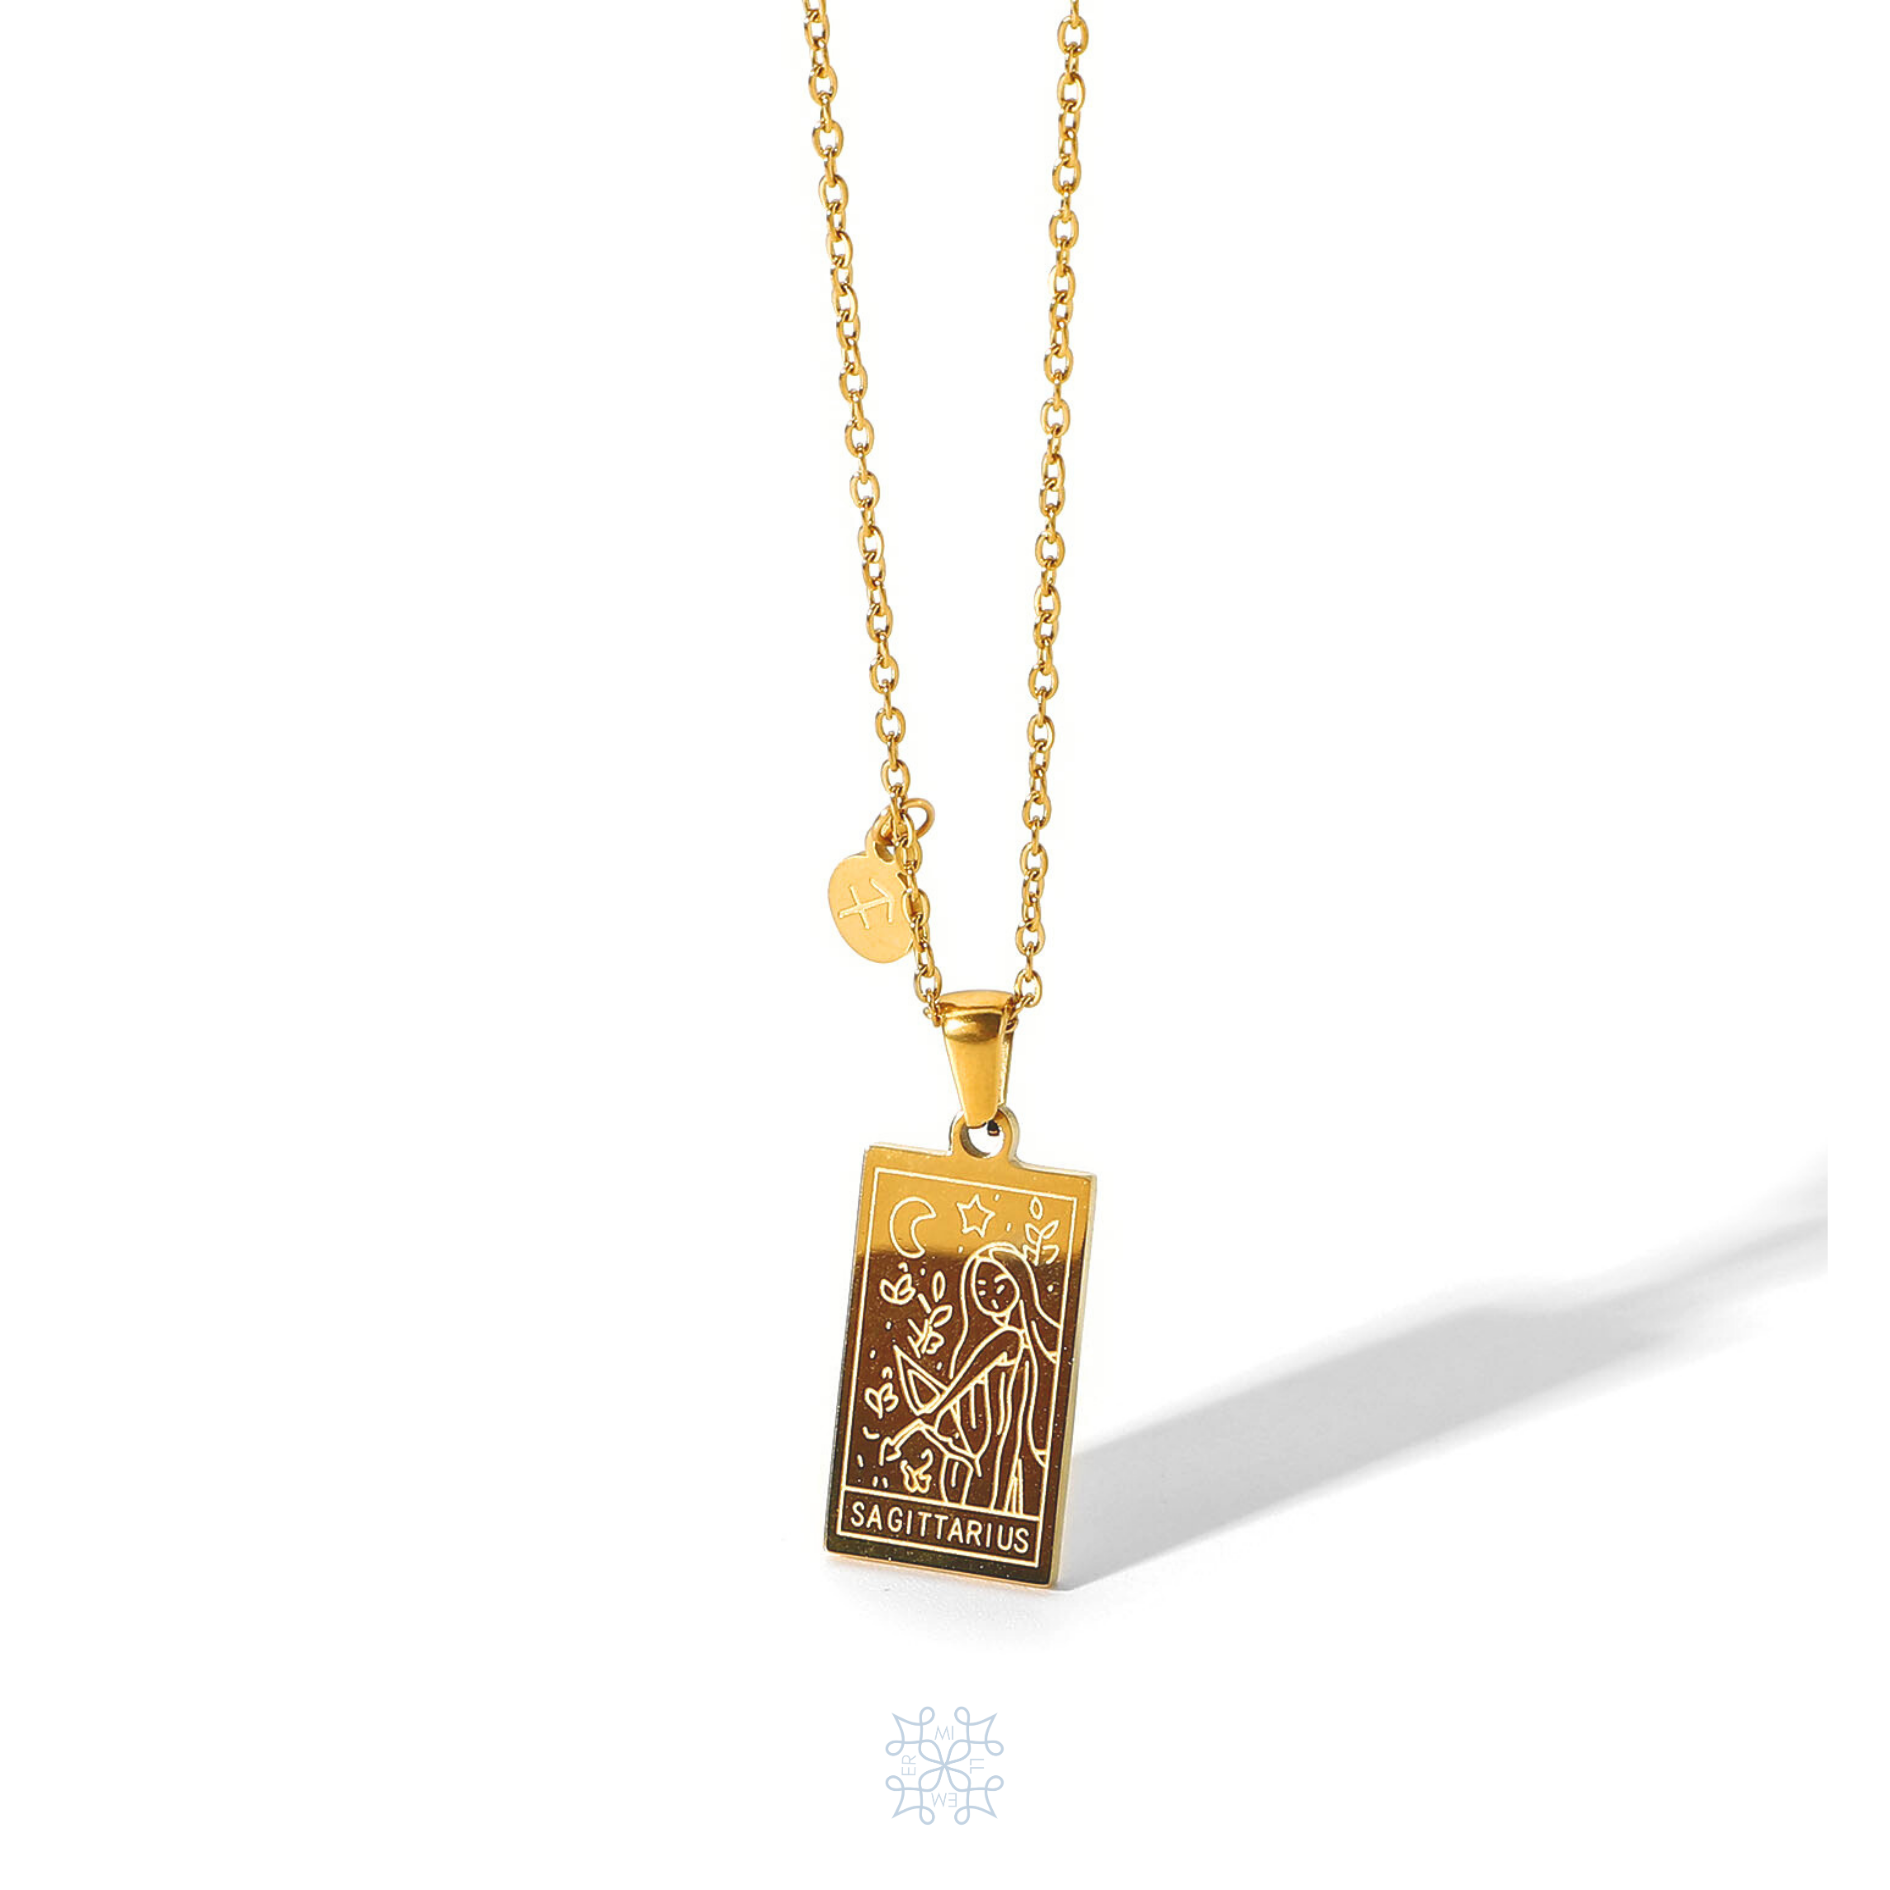 Rectangular gold pendant with Sagittarius engraved and the word Sagittarius in the bottom. Gold pendant with a chain necklace. In the side of the gold pendant is a circle small medallion with the symbol of Sagittarius engraved on it. Sagittarius zodiac pendant gold necklace.